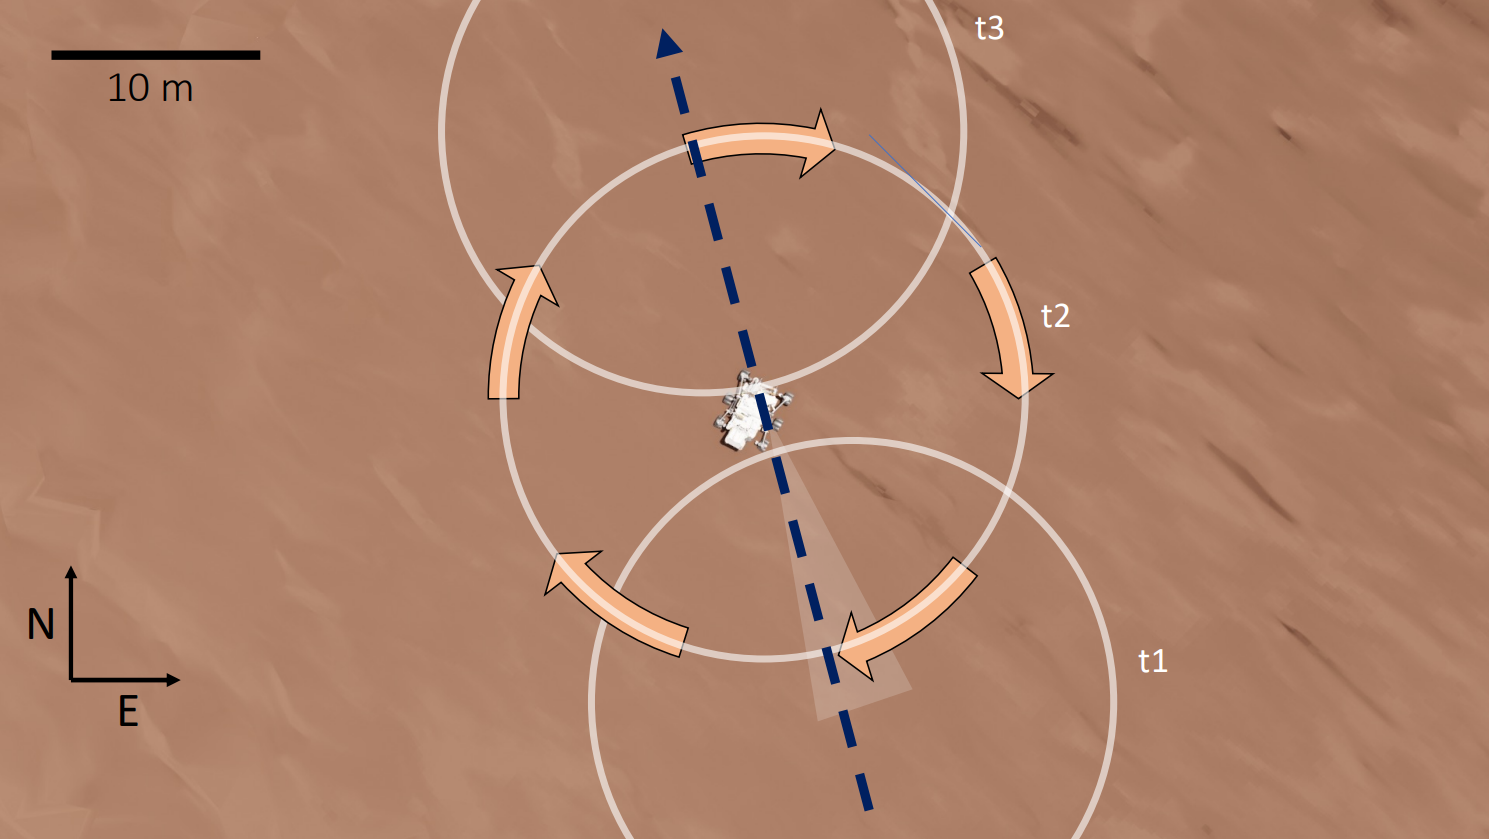 A graphic of the dust devil's path over the Perseverance rover. (Graphic: N. Murdoch / ISAE-SUPAERO)